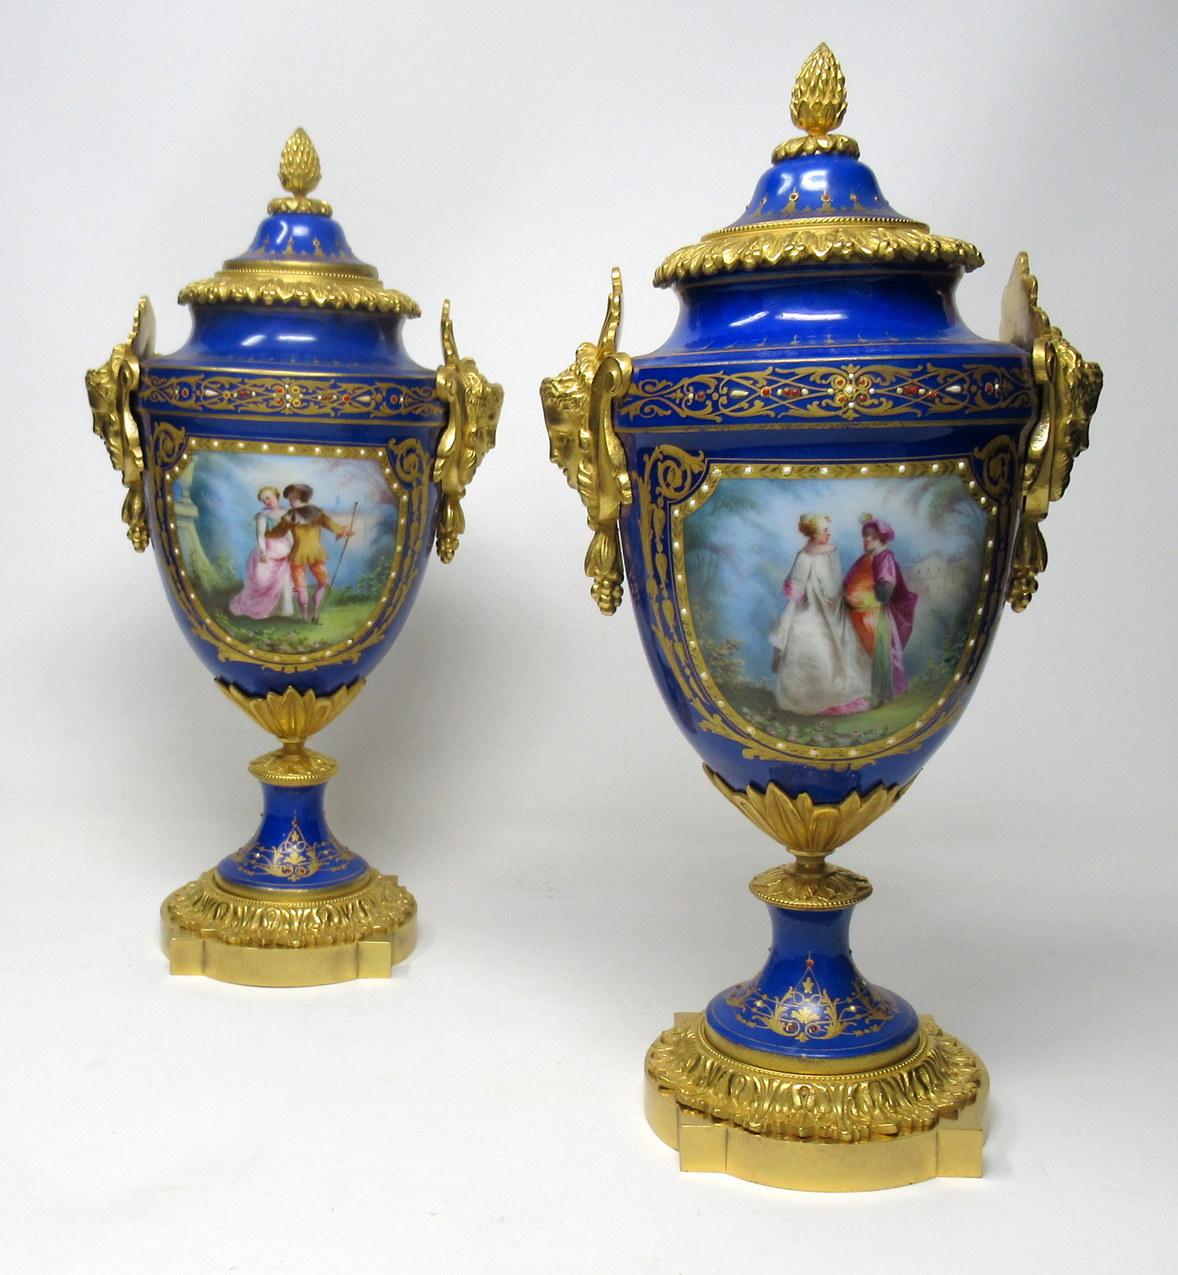 Stunning pair of French Sevres soft paste porcelain and ormolu twin handle table or mantle urns of traditional form and of outstanding quality, and good size proportions, each raised on a square stepped base with canted corners. 

The twin handles